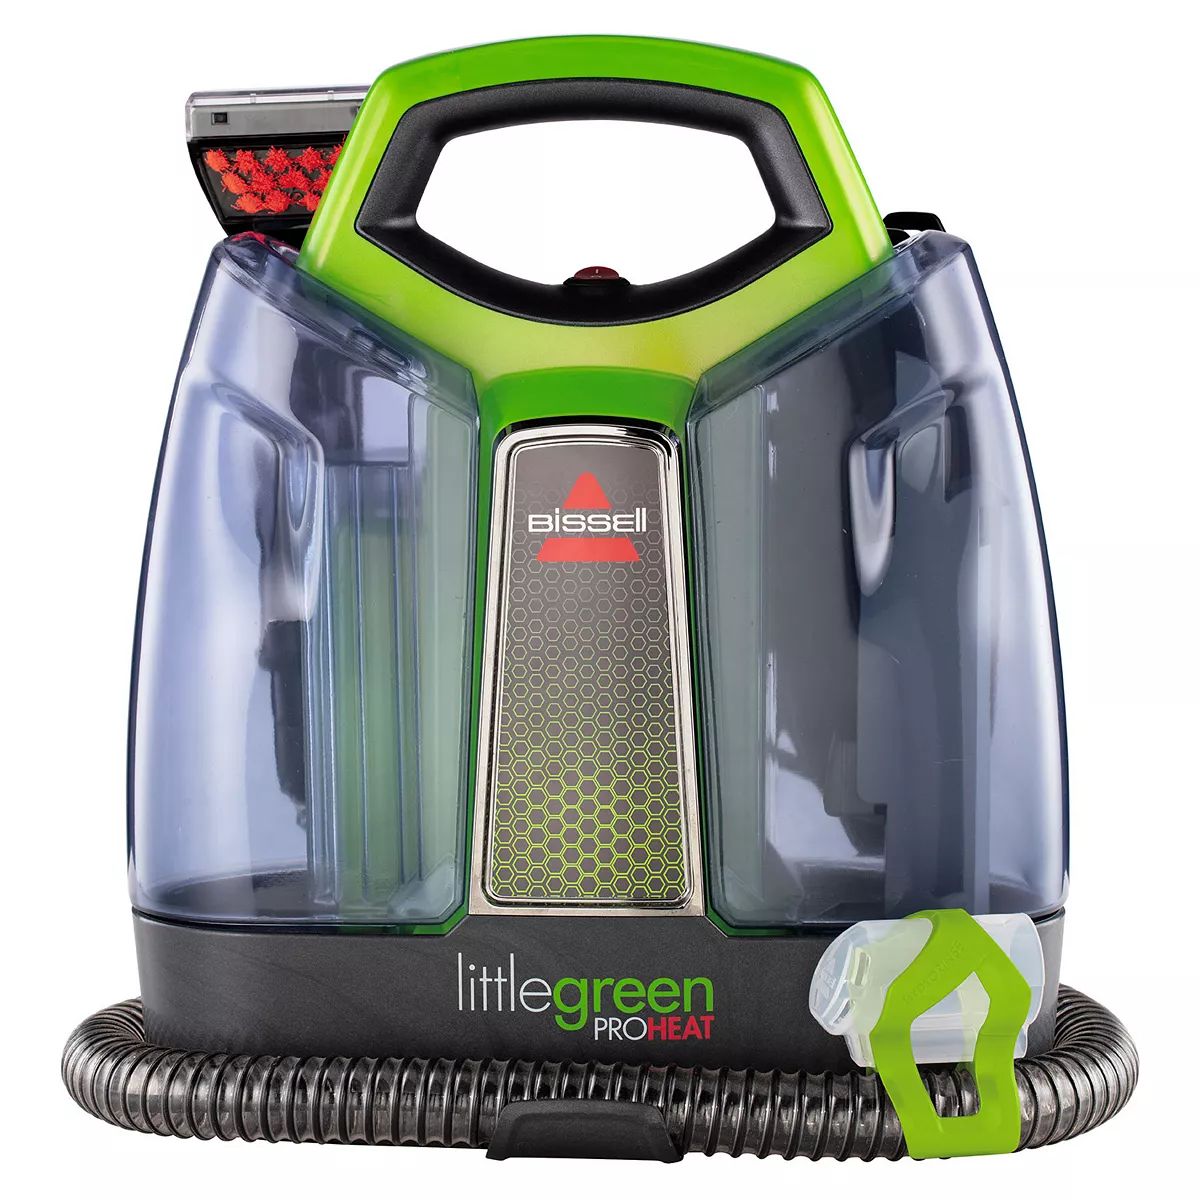 BISSELL Little Green ProHeat Carpet Cleaner (2513G) | Kohl's